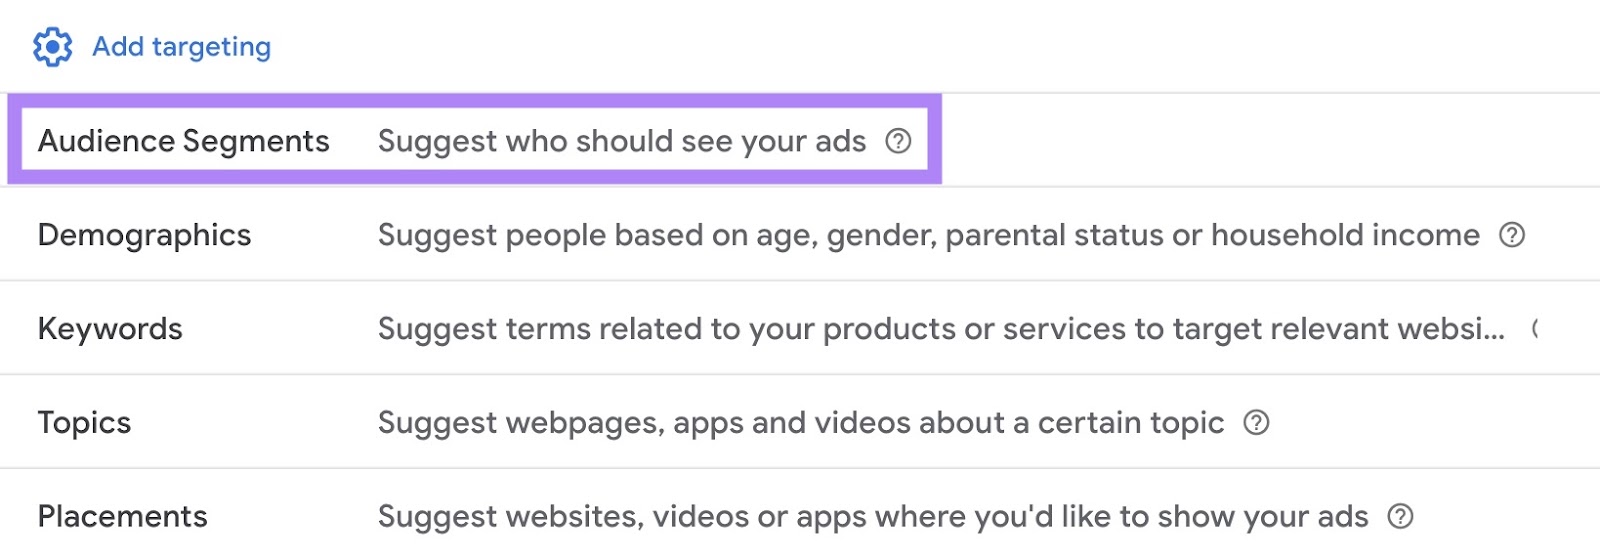 A list of targeting options with 'Audience Segments' selected.